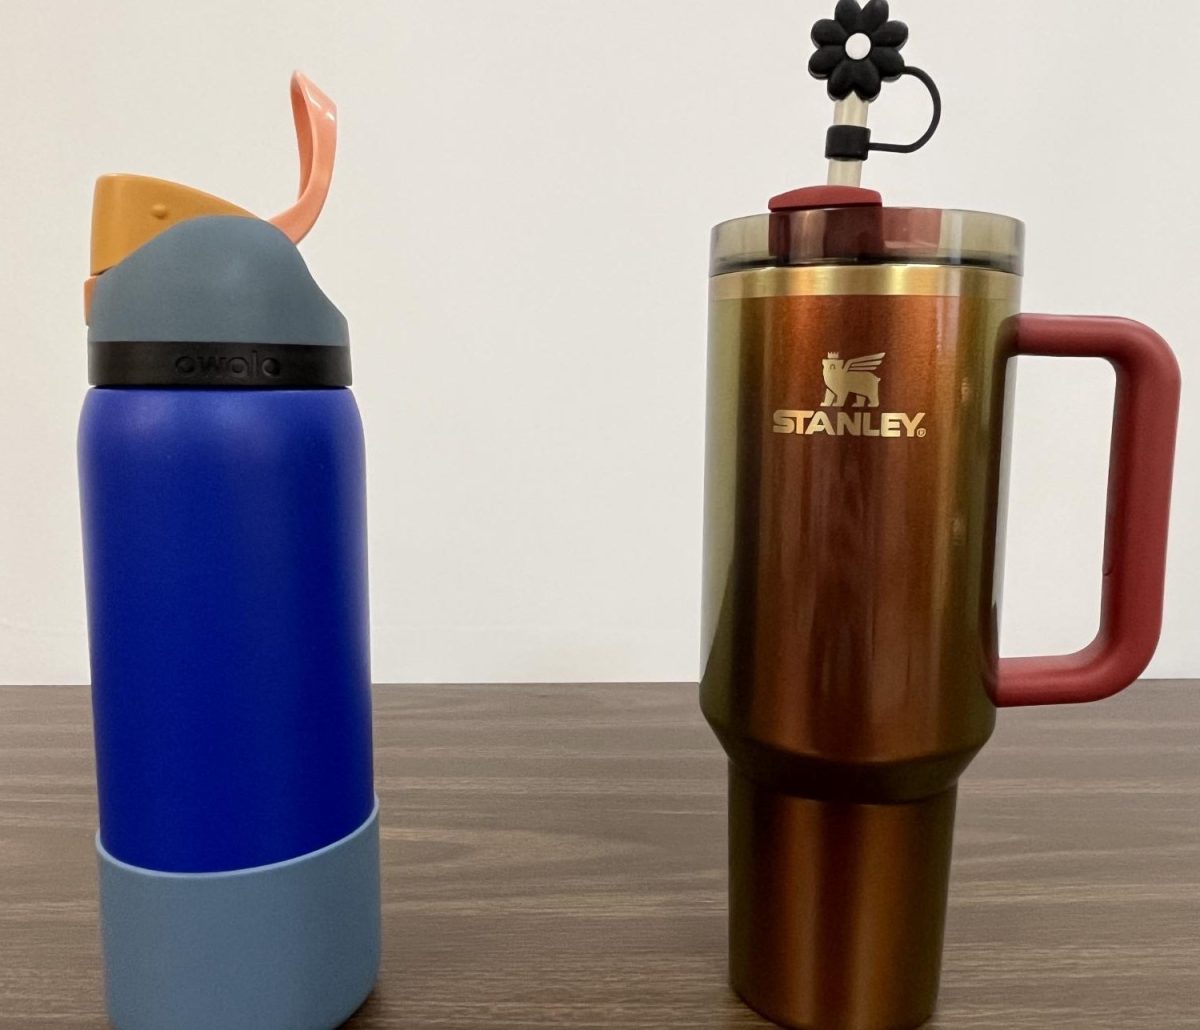 Accessories for days. This is the straw topper for the Stanley and the bottle boot for the Owala. “I like that I can have a water bottle that’s a fun color. I’d prefer a Yeti, but the bright orange is my favorite part,” Neve Guerrette ‘25 said. 
